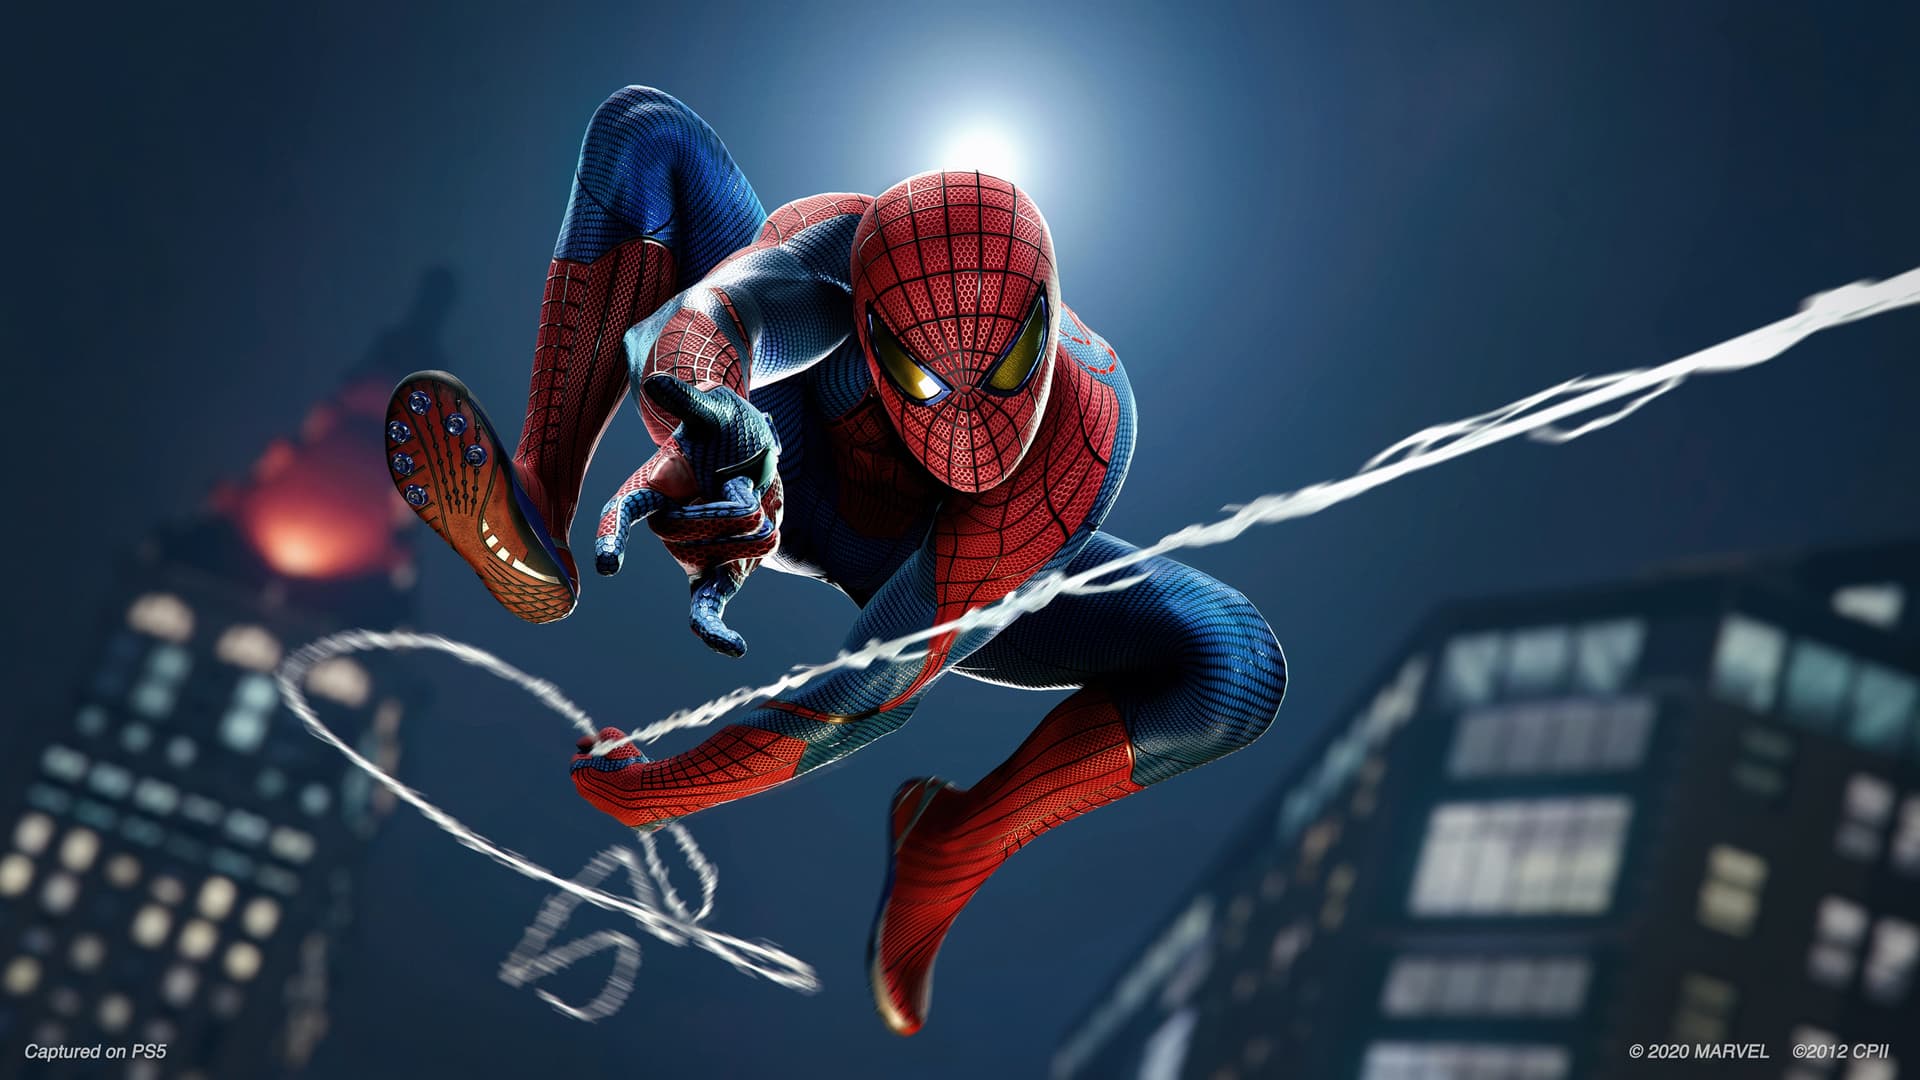 Marvel's Spider-Man Remastered': First Look at the Game on PlayStation 5 |  Marvel